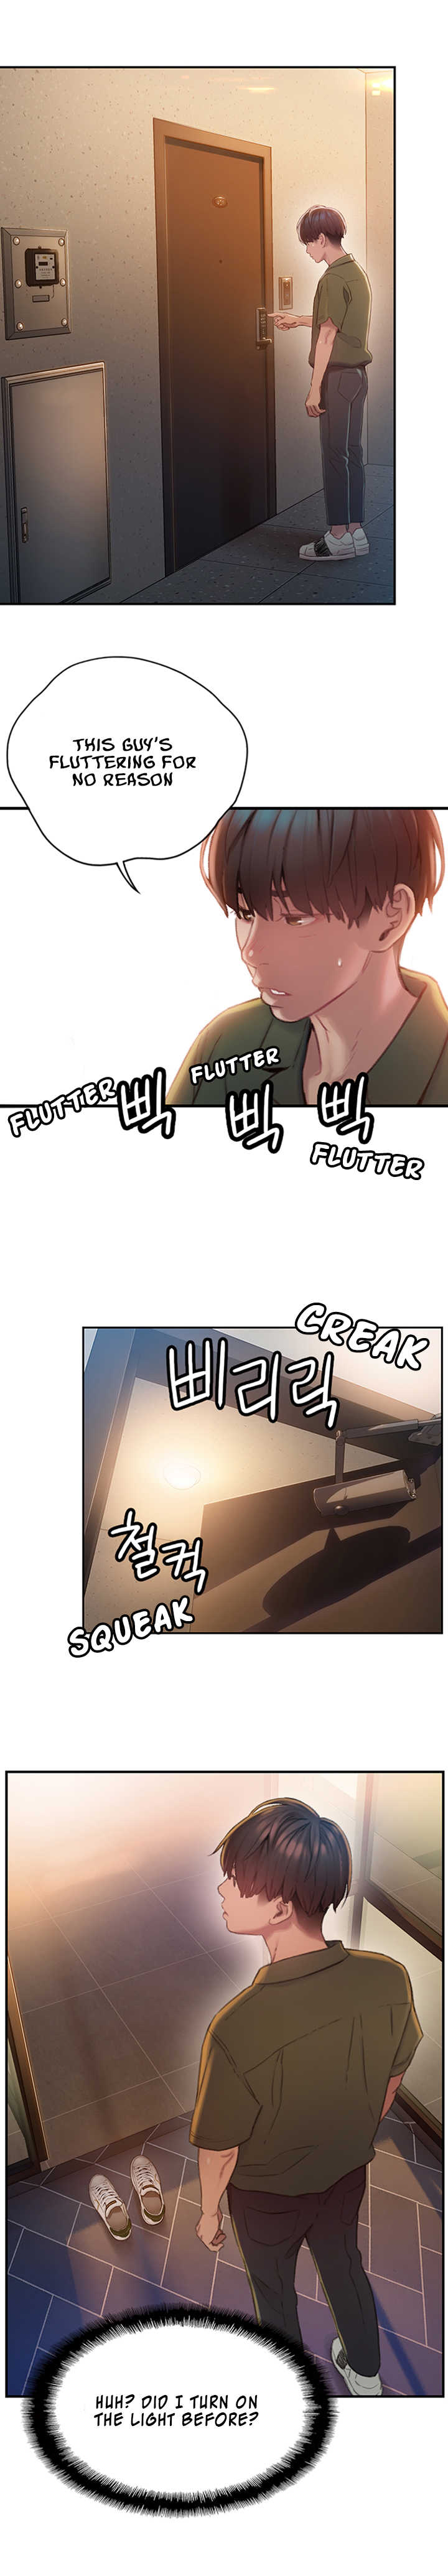 [Park Hyeongjun] Love Limit Exceeded V.2 (01-09) (Ongoing) - Page 26